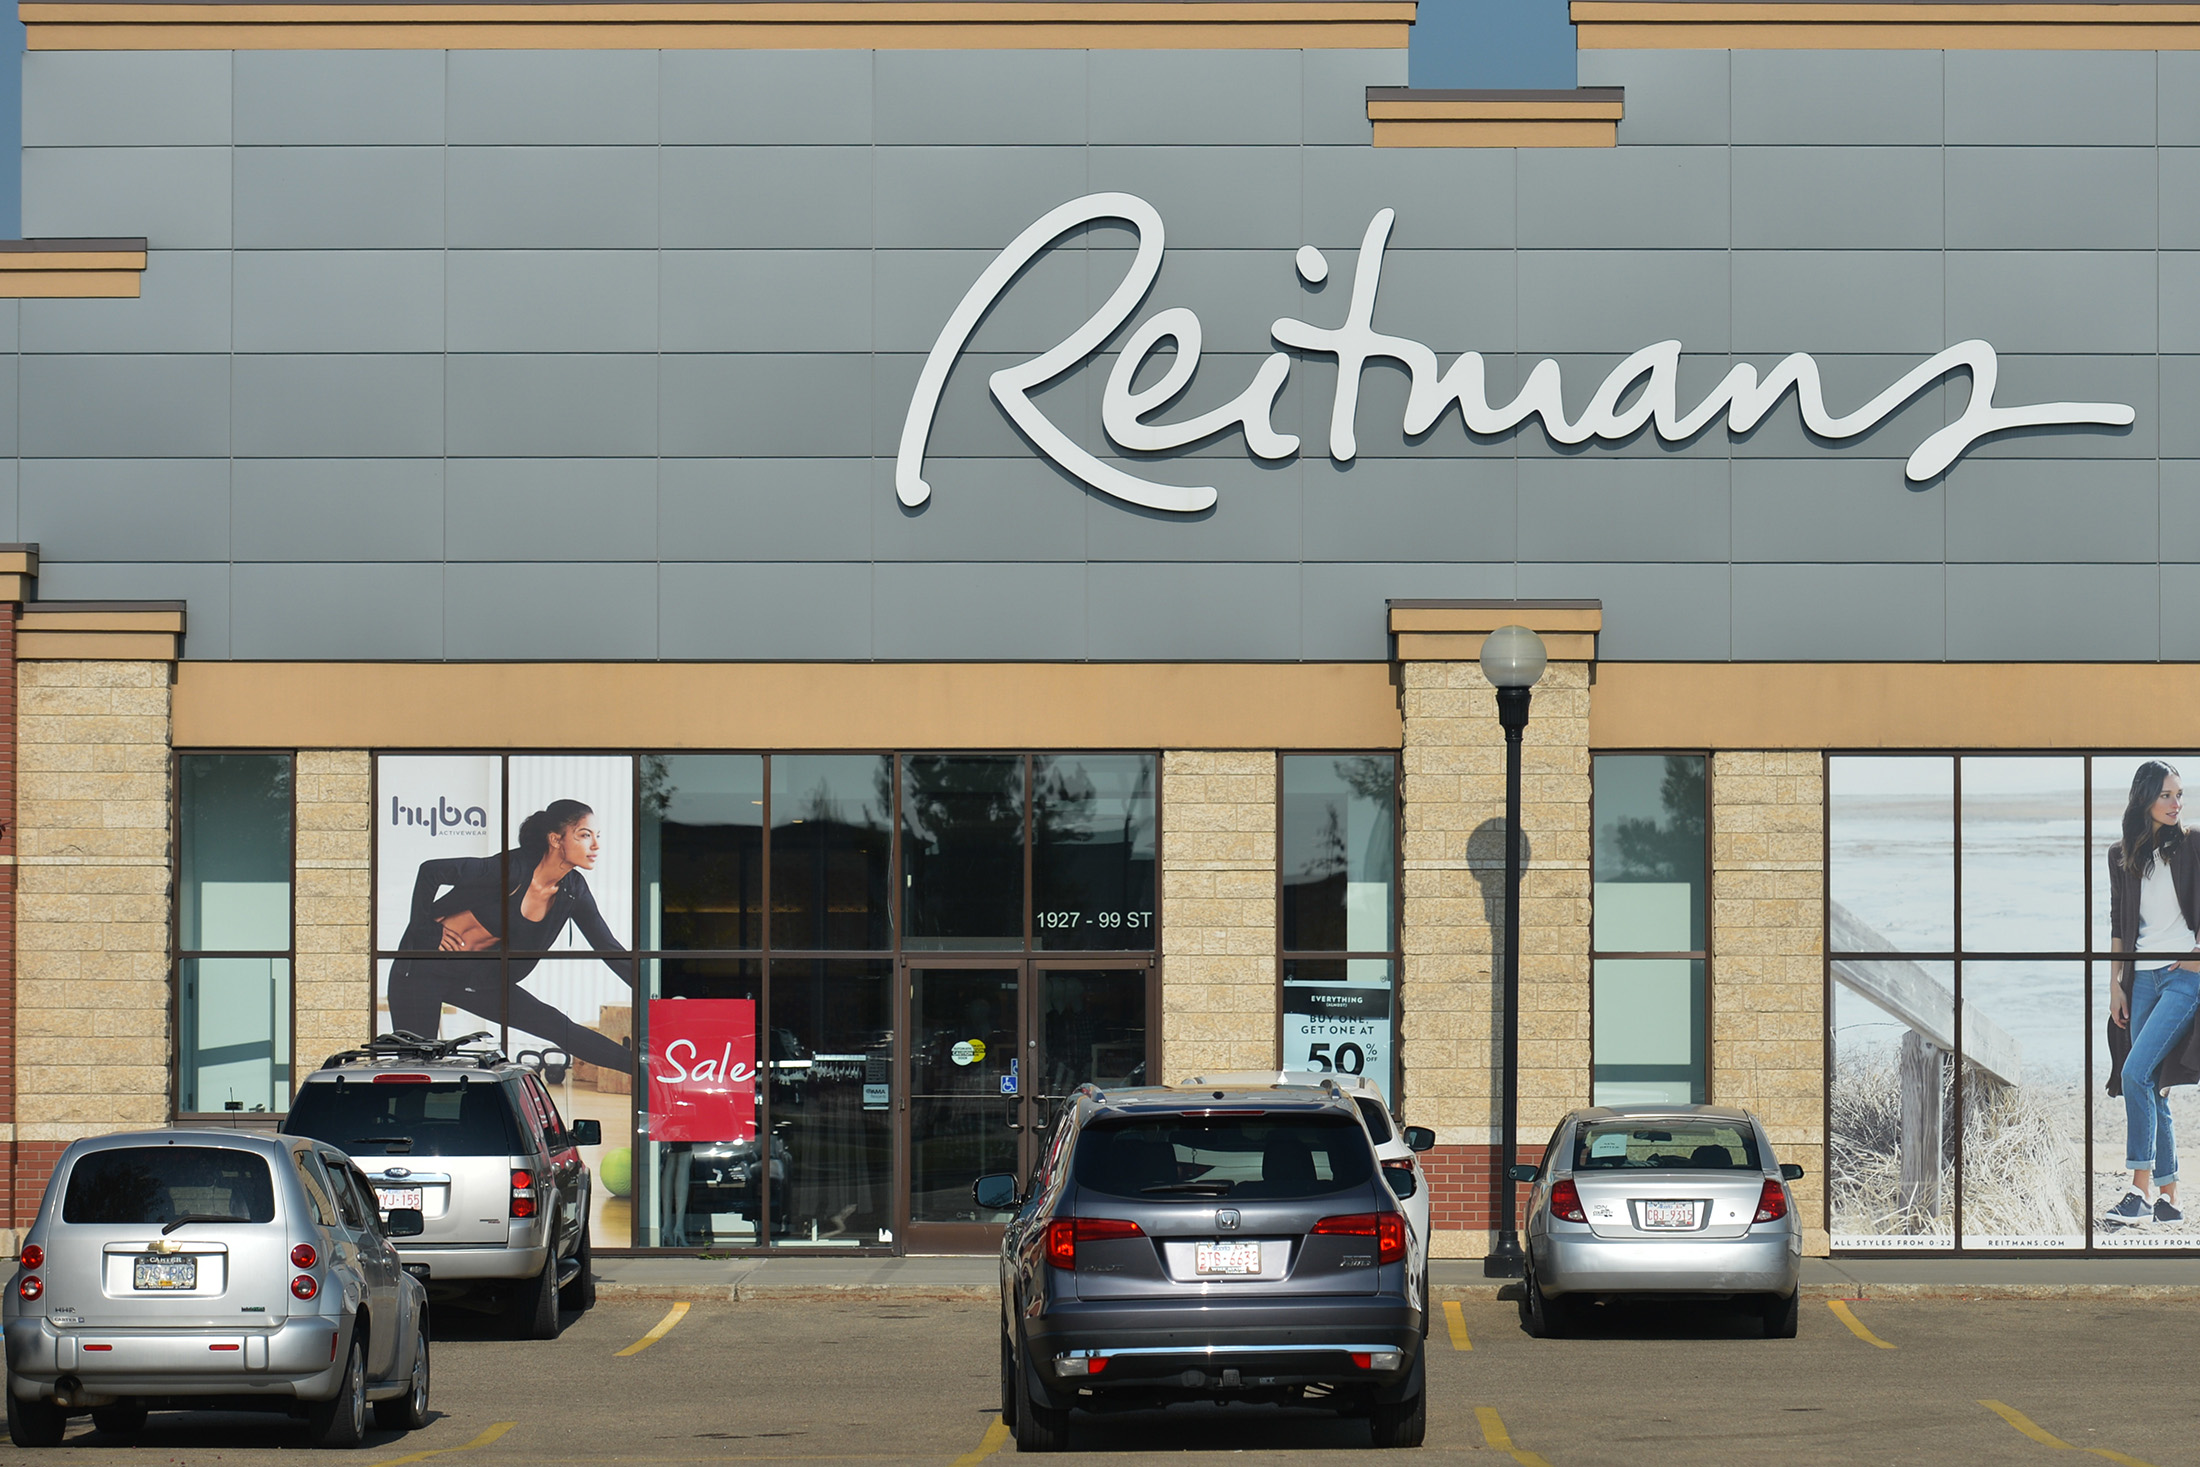 Retail Chain Reitmans Seeks Bankruptcy Protection in Canada - Bloomberg